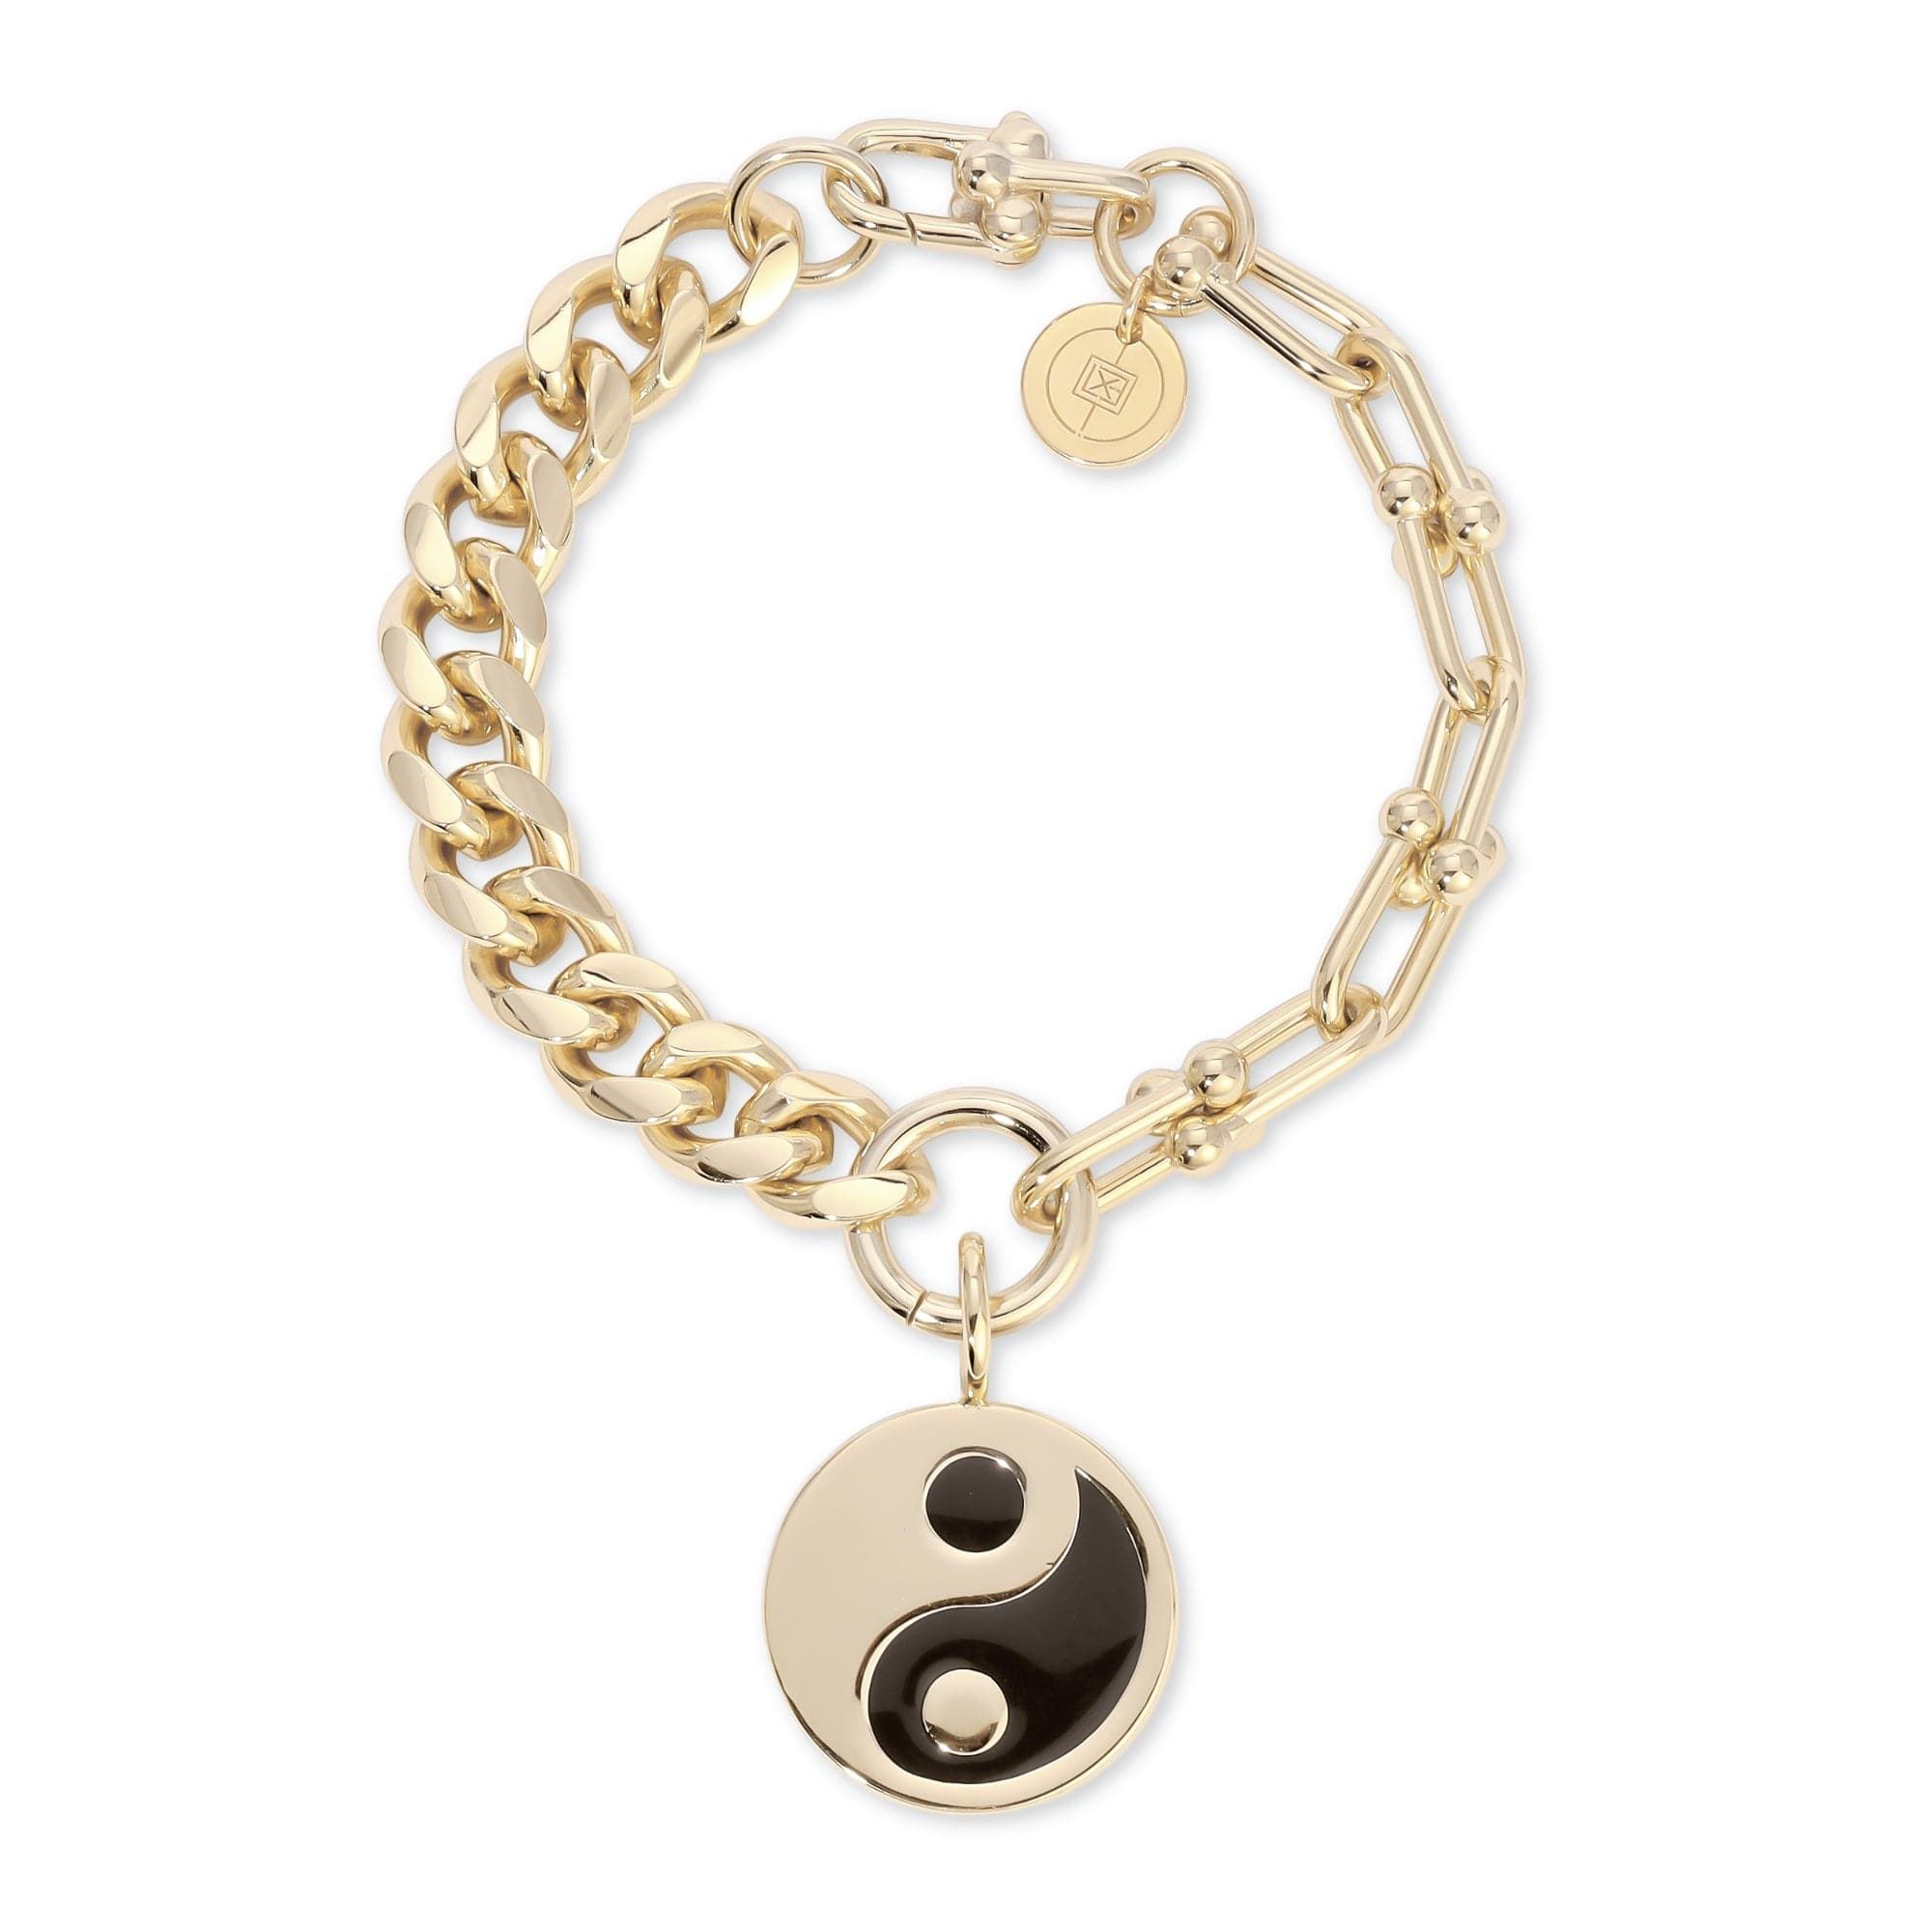 a gold chain bracelet with a yin symbol charm